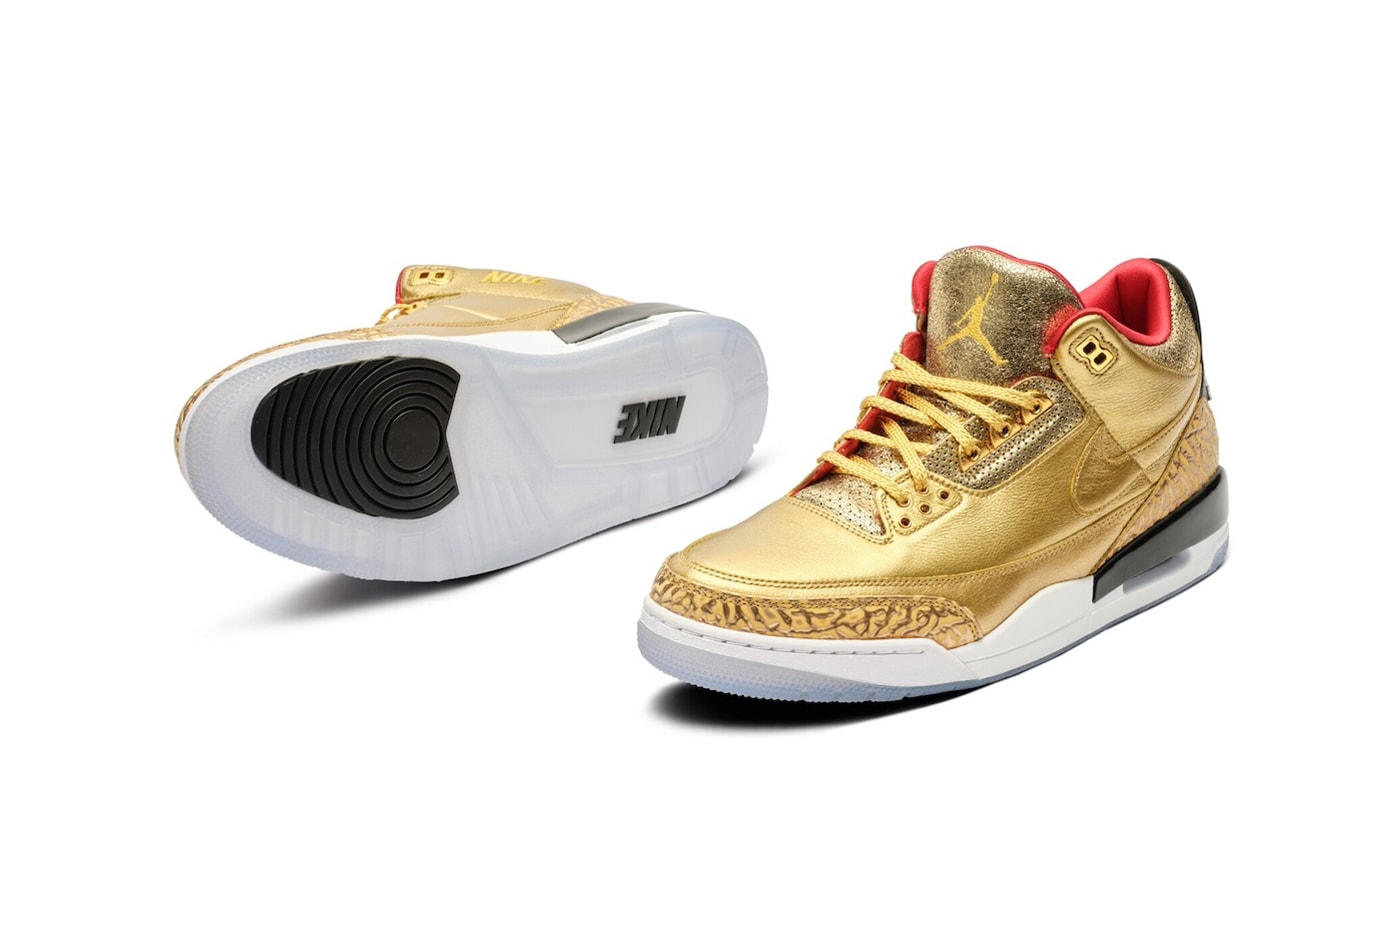 Spike Lee's Air Jordan 3 "Gold Oscars" PE Is up For Auction sotheby's Portland Rescue Mission vvalued between 15000 to 20000 mike and spike michael jordan jordan brand nike jumpman